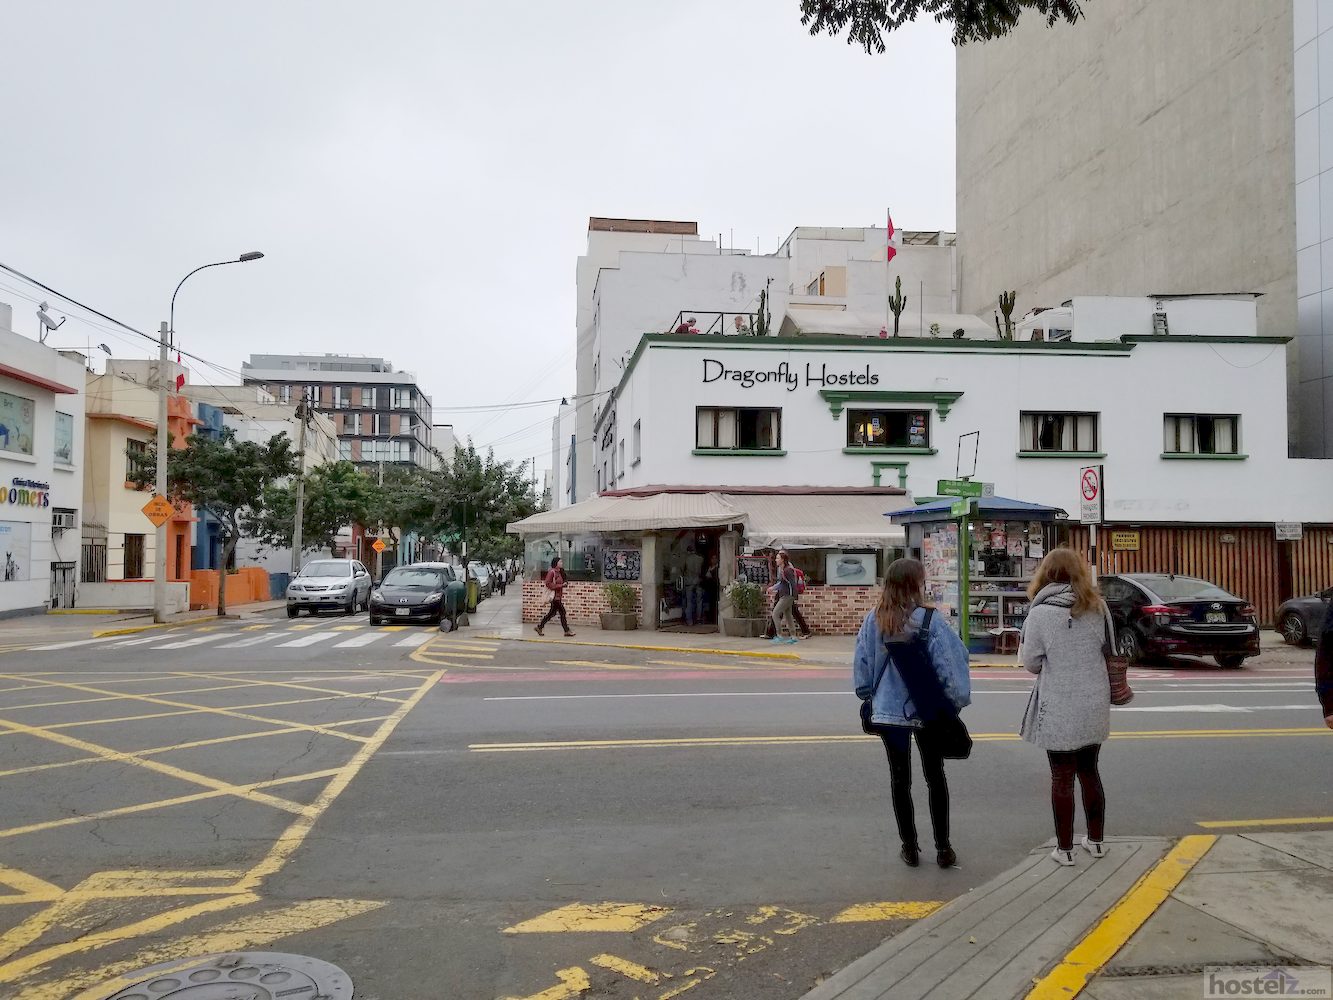 View of hostel and adjacent restaurant from across the street